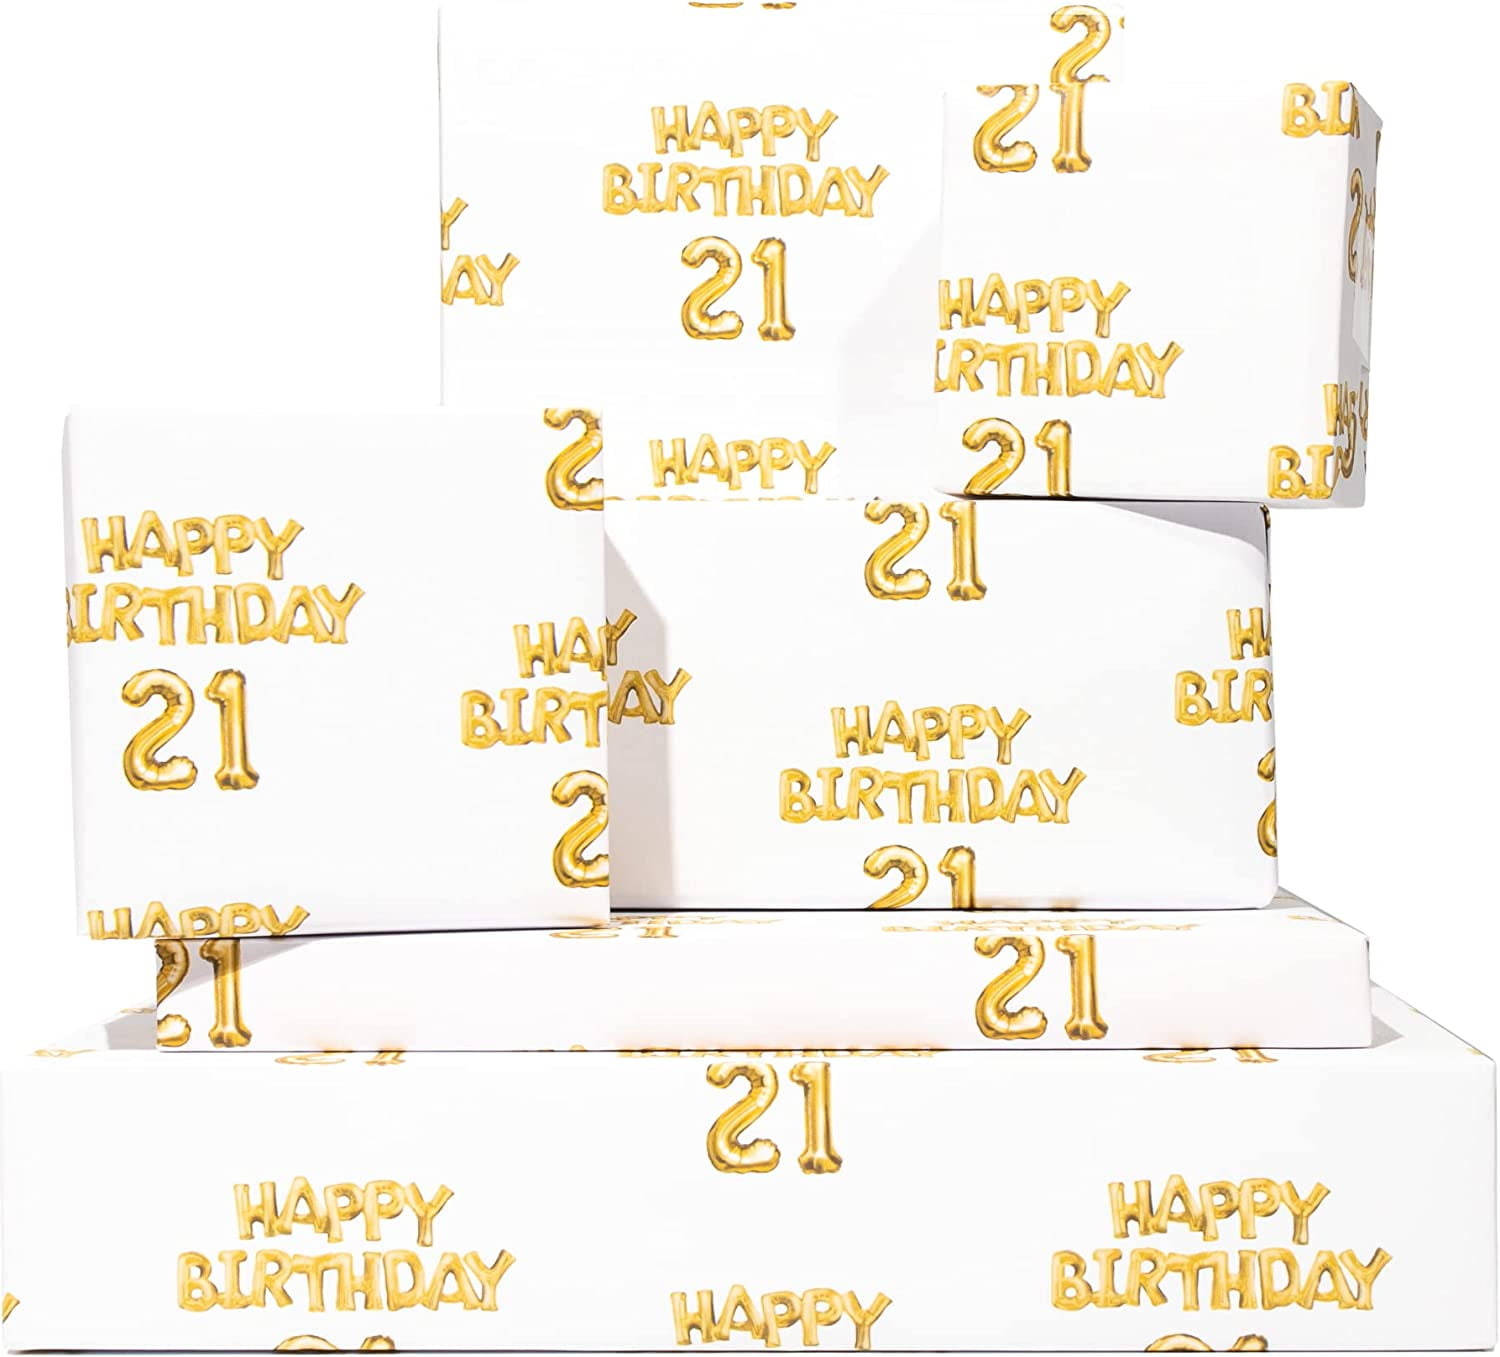 100yellow happy birthday Gift wrapping paper, (Set of 10) Unique Designer  Wrapping Paper for Gifts – (12x18 Inches) Birthday/Anniversary/Party's  Girlfriend, boyfriend, Husband, Wife, Brother, sister, Mother, Father,  Kids, Teacher, Friend Paper Gift